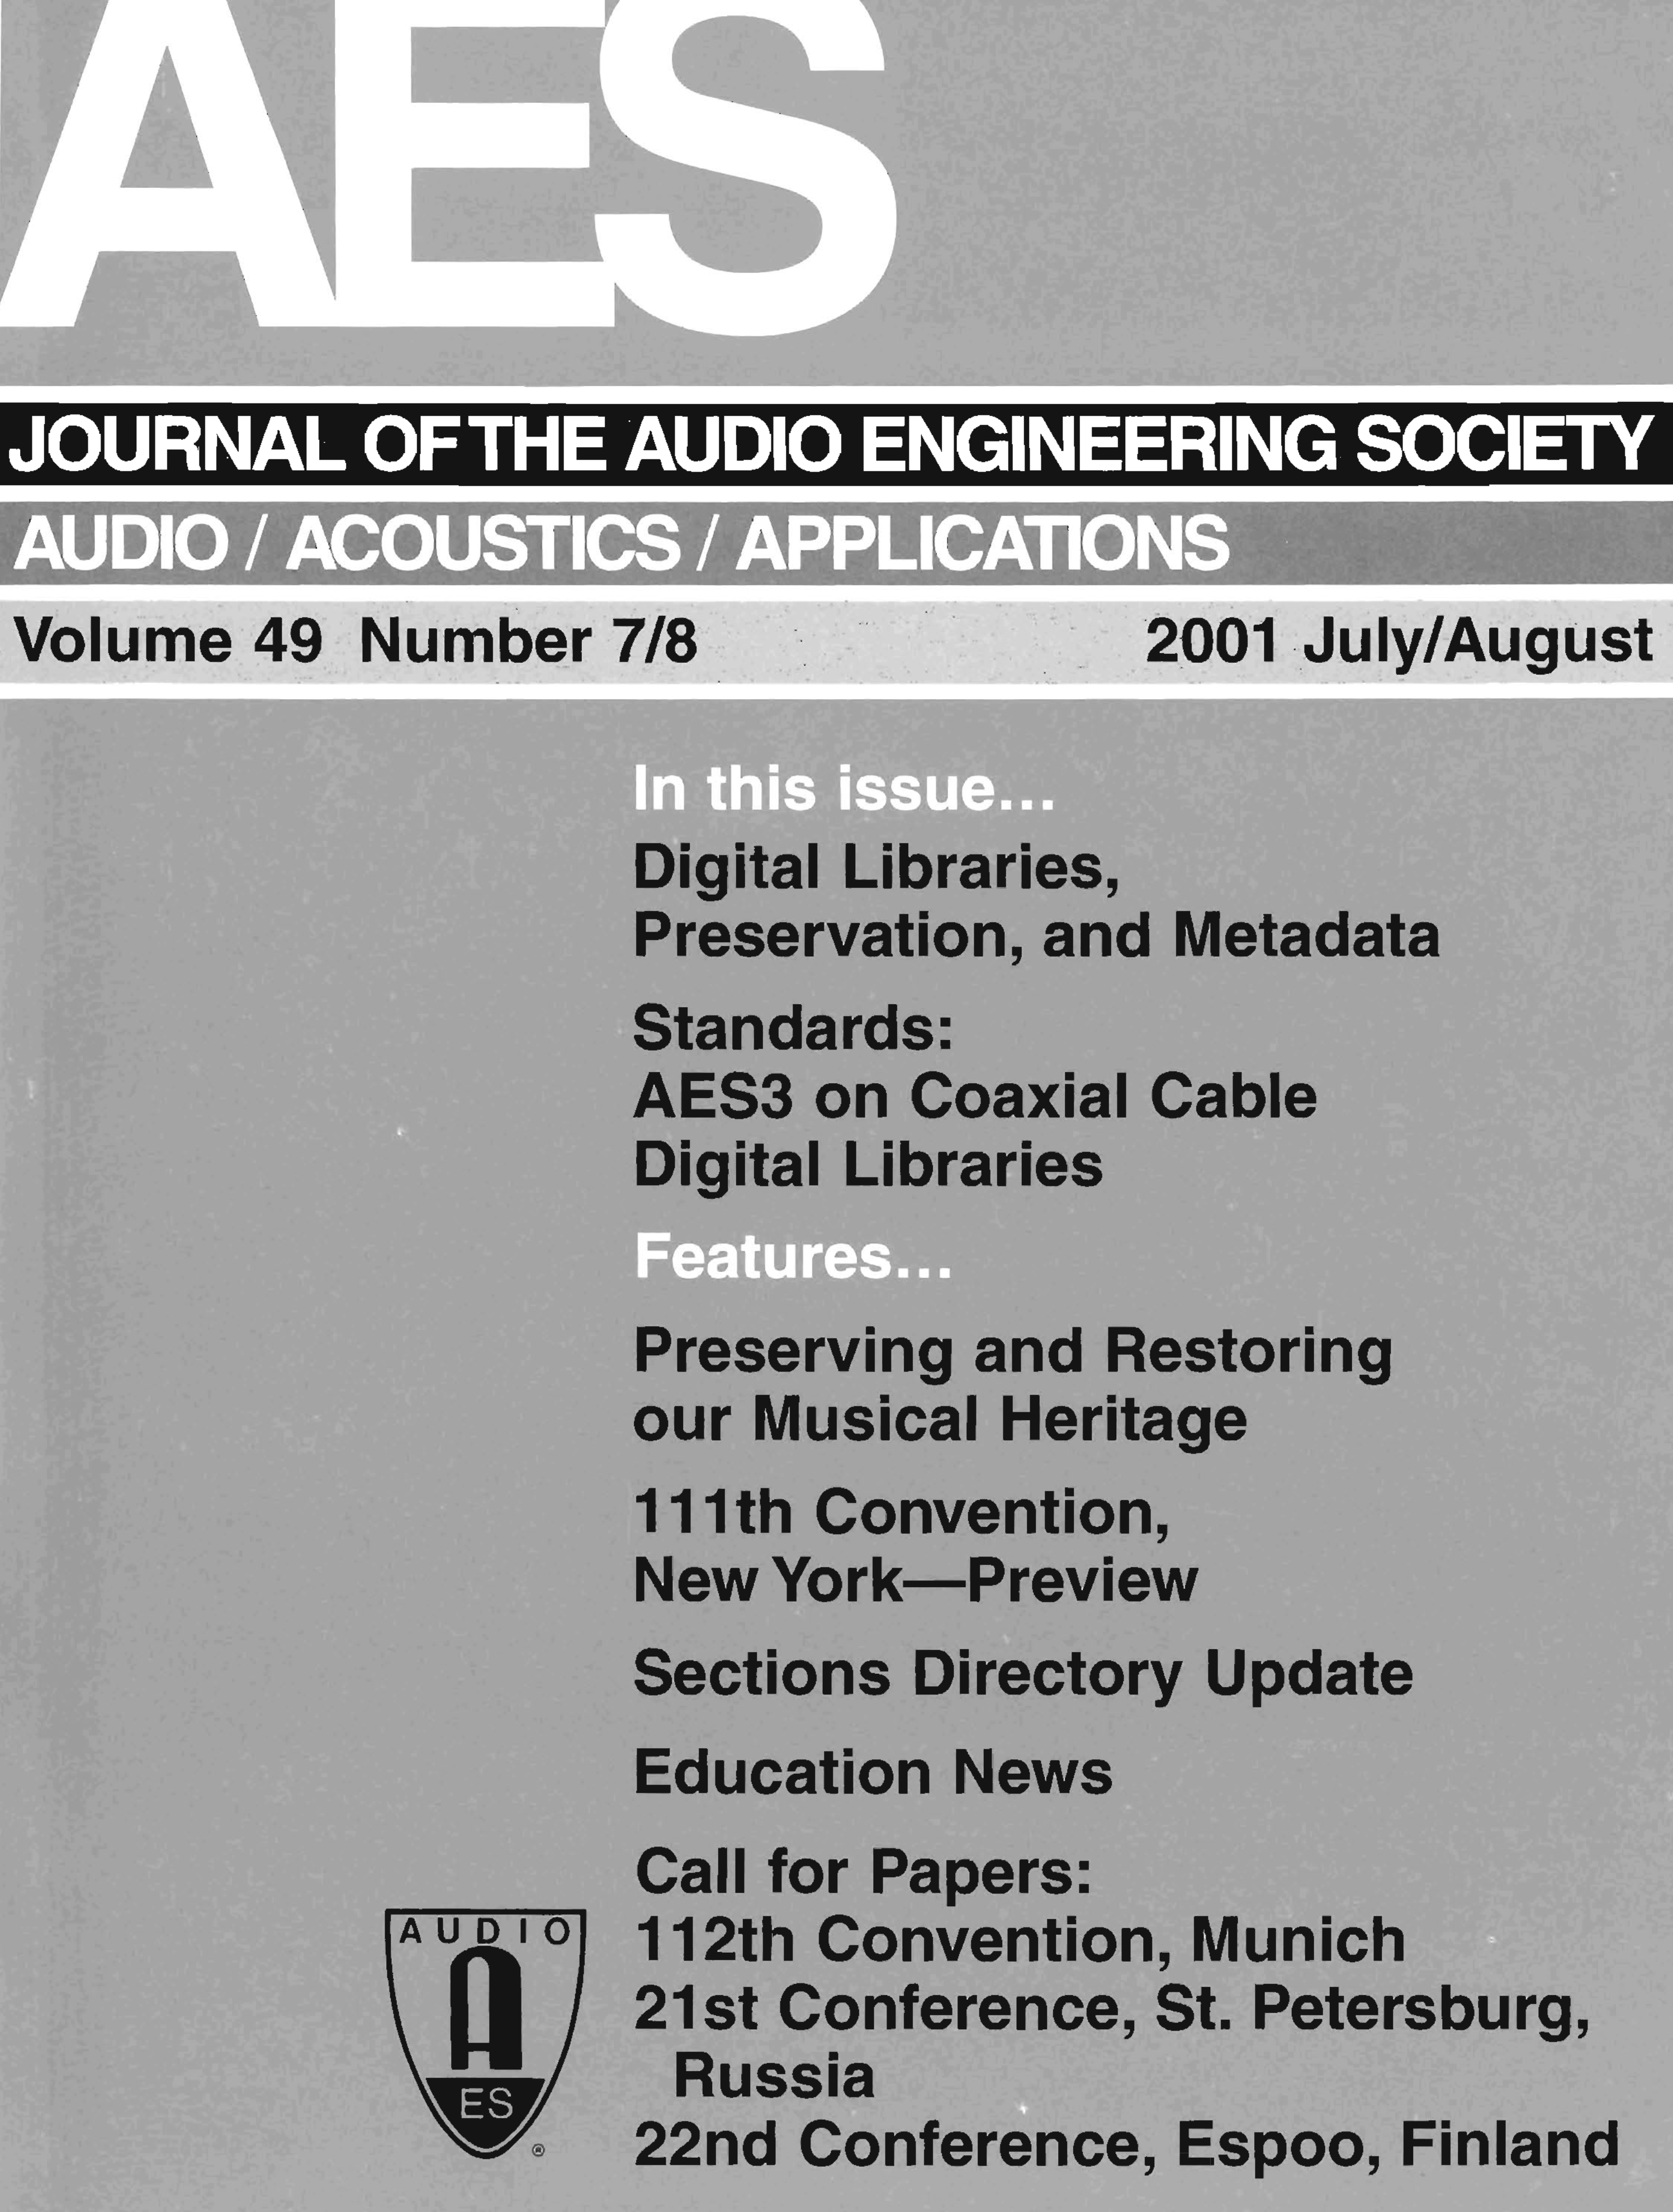 E-Library Complete Journal: Volume 49 Issue 7/8